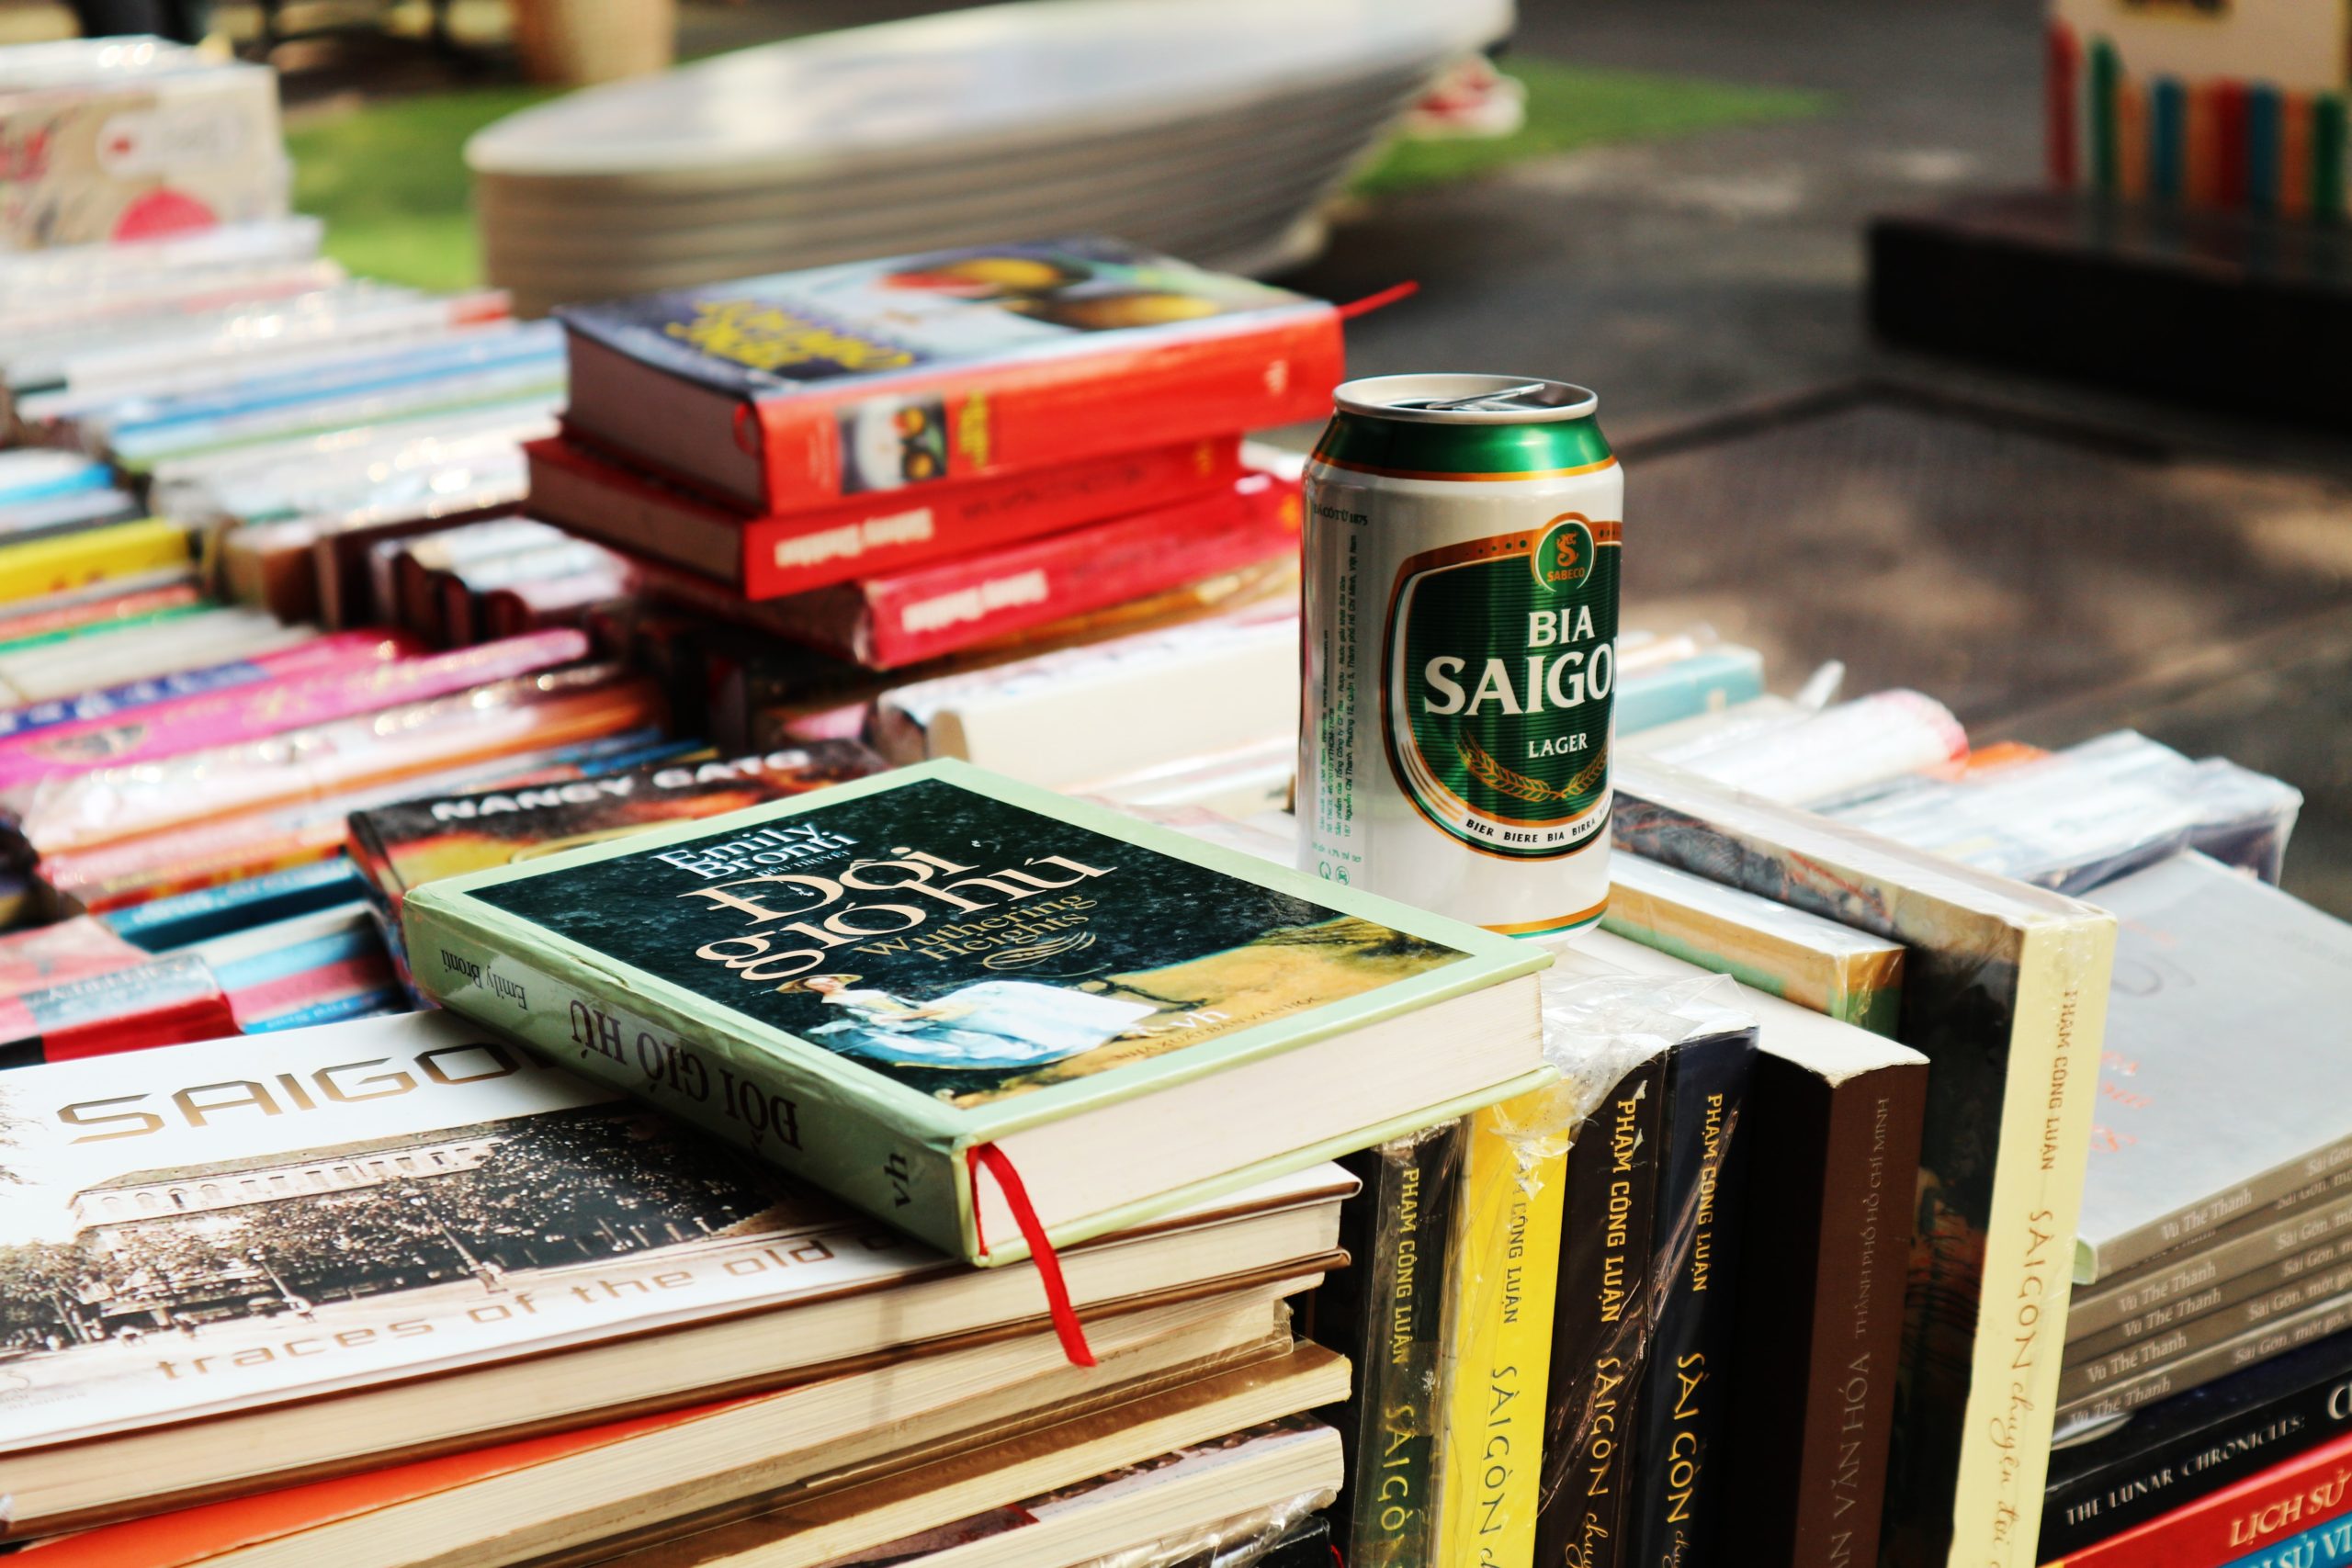 A stack of books sits with a can of Bia Saigon.